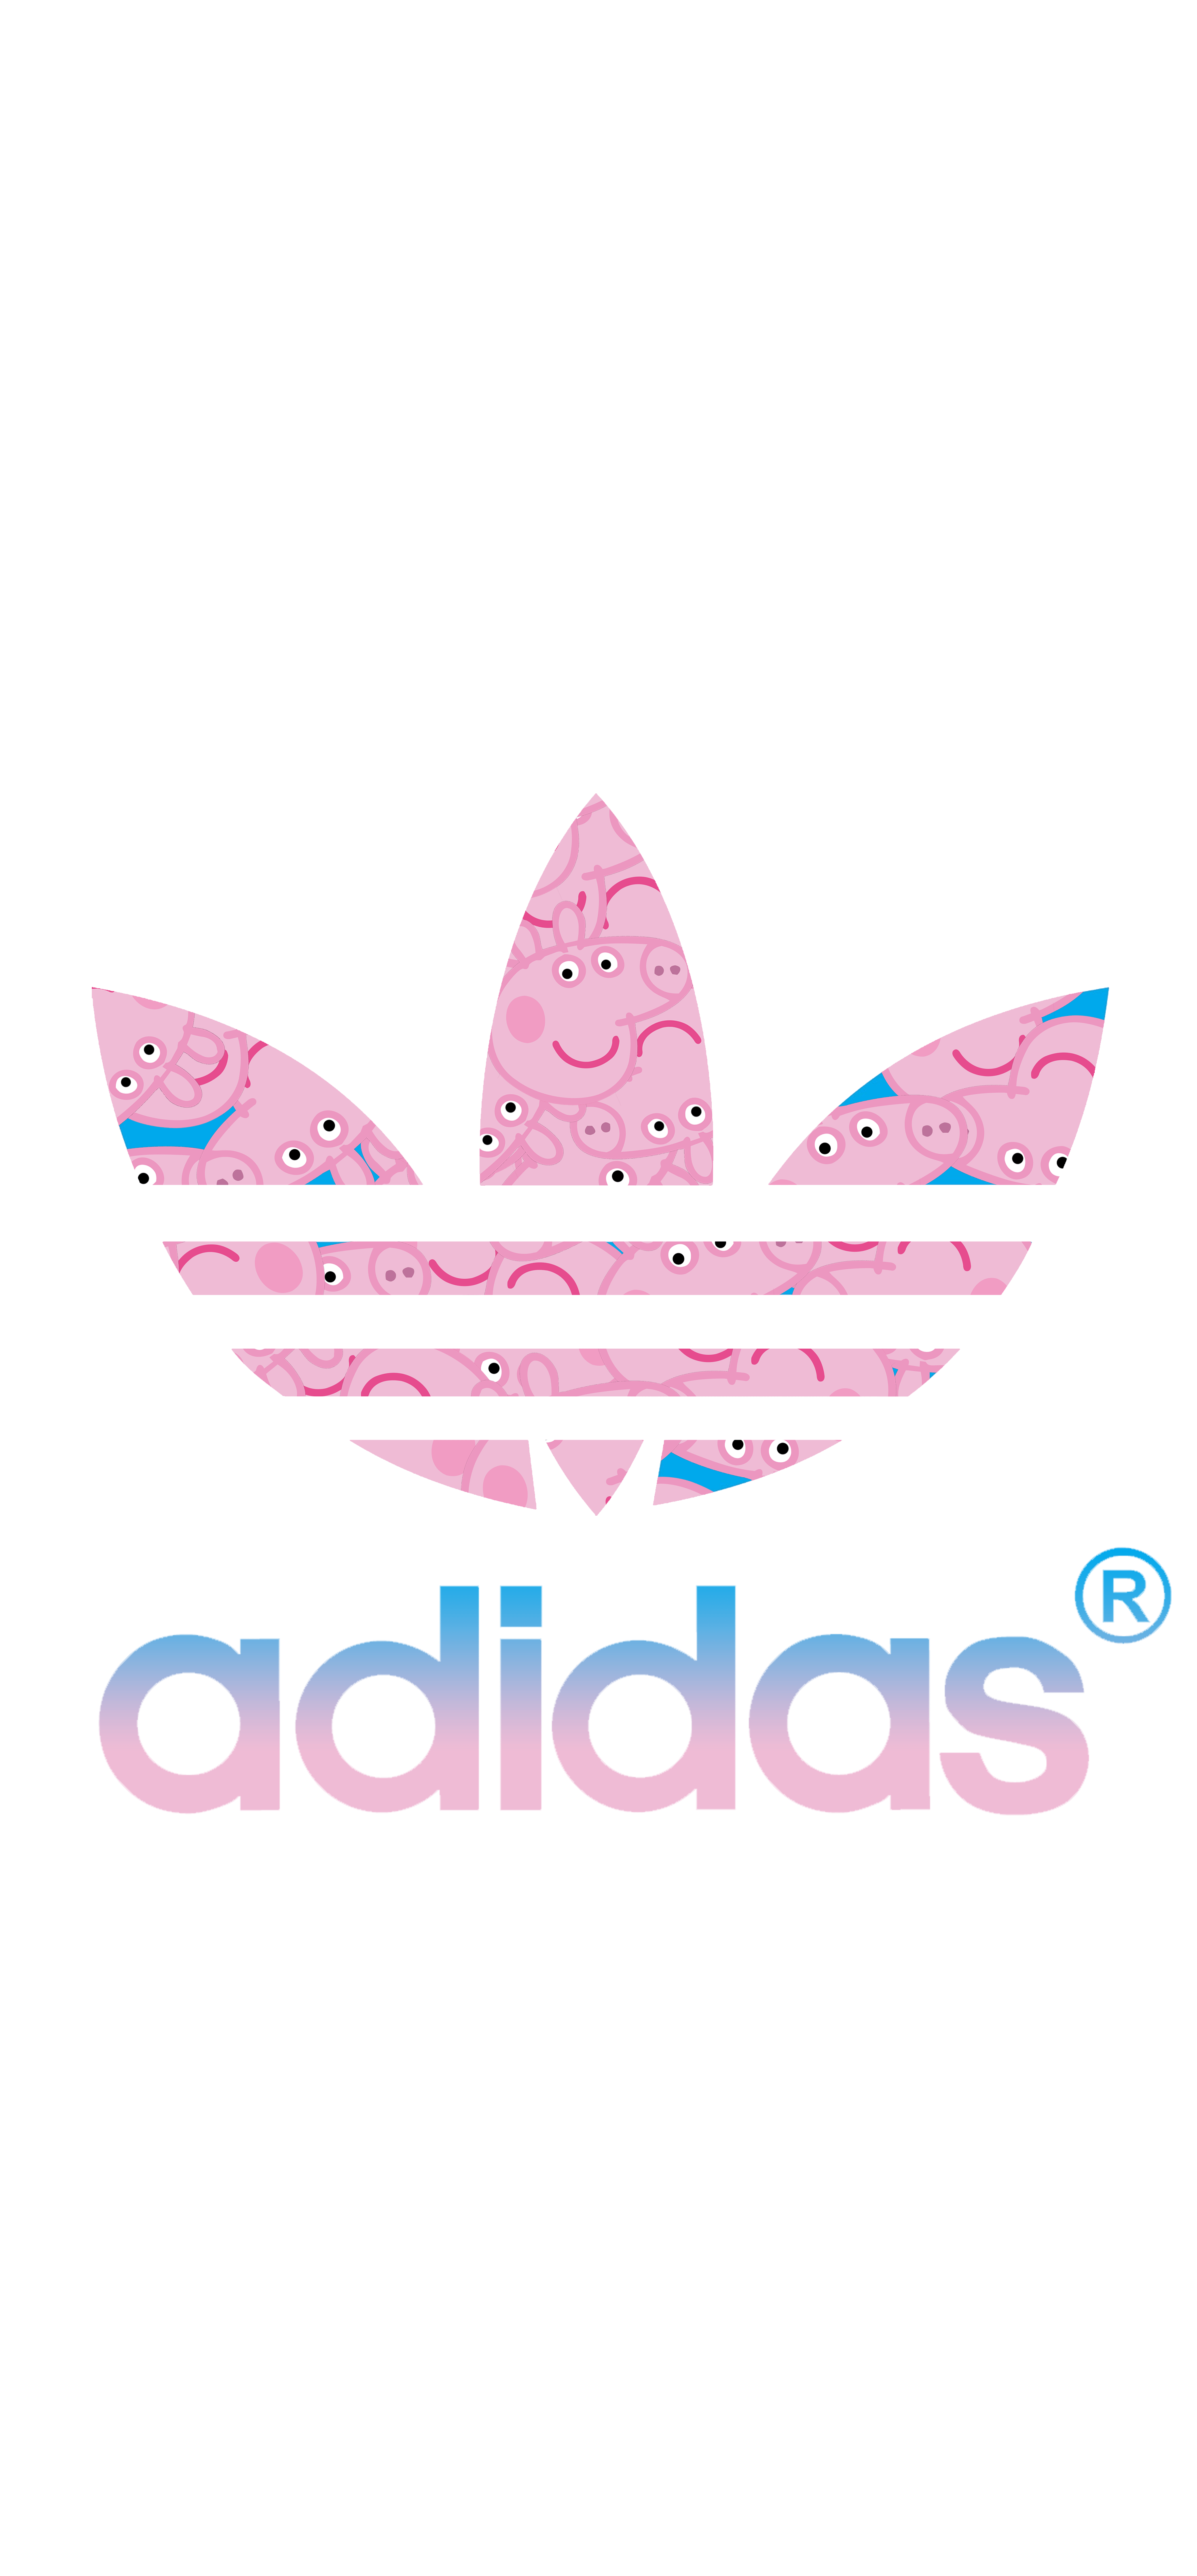 Adidas logo with pink and blue colors - Peppa Pig